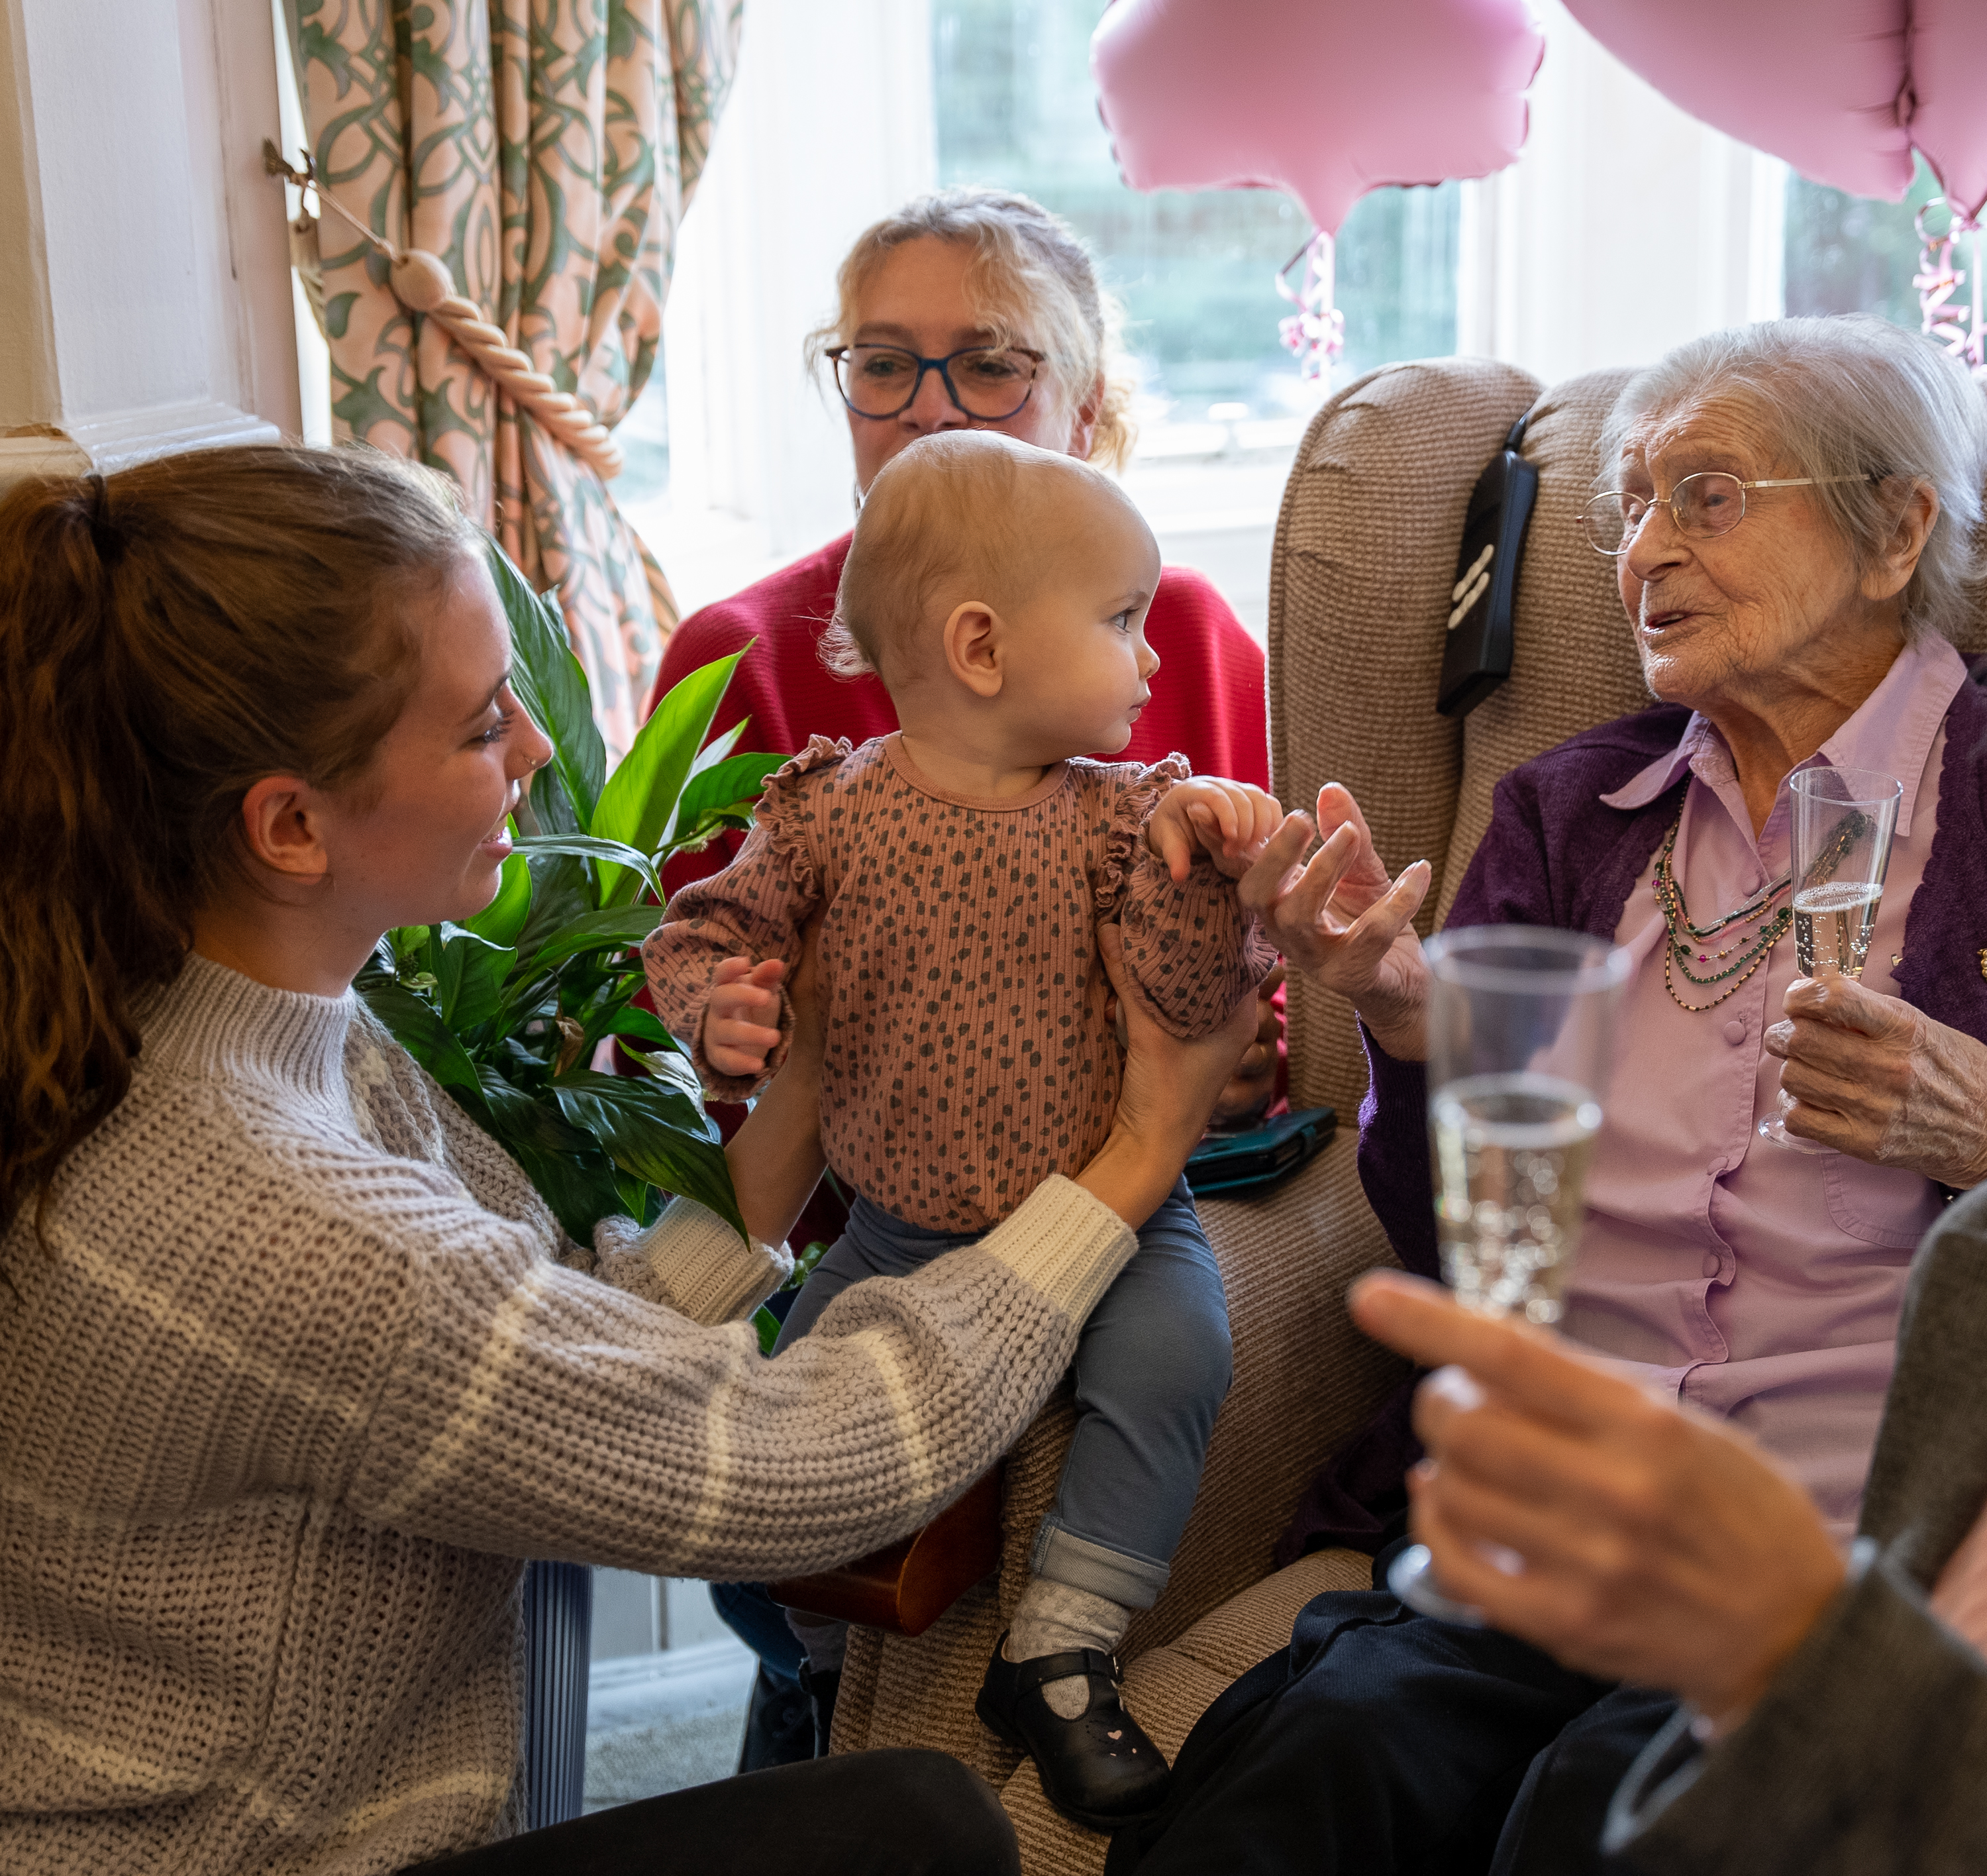 Kathleen Withall celebrating 103rd birthday with youngest of five generations in her family, great granddaughter Millie an great great granddaughter Nova